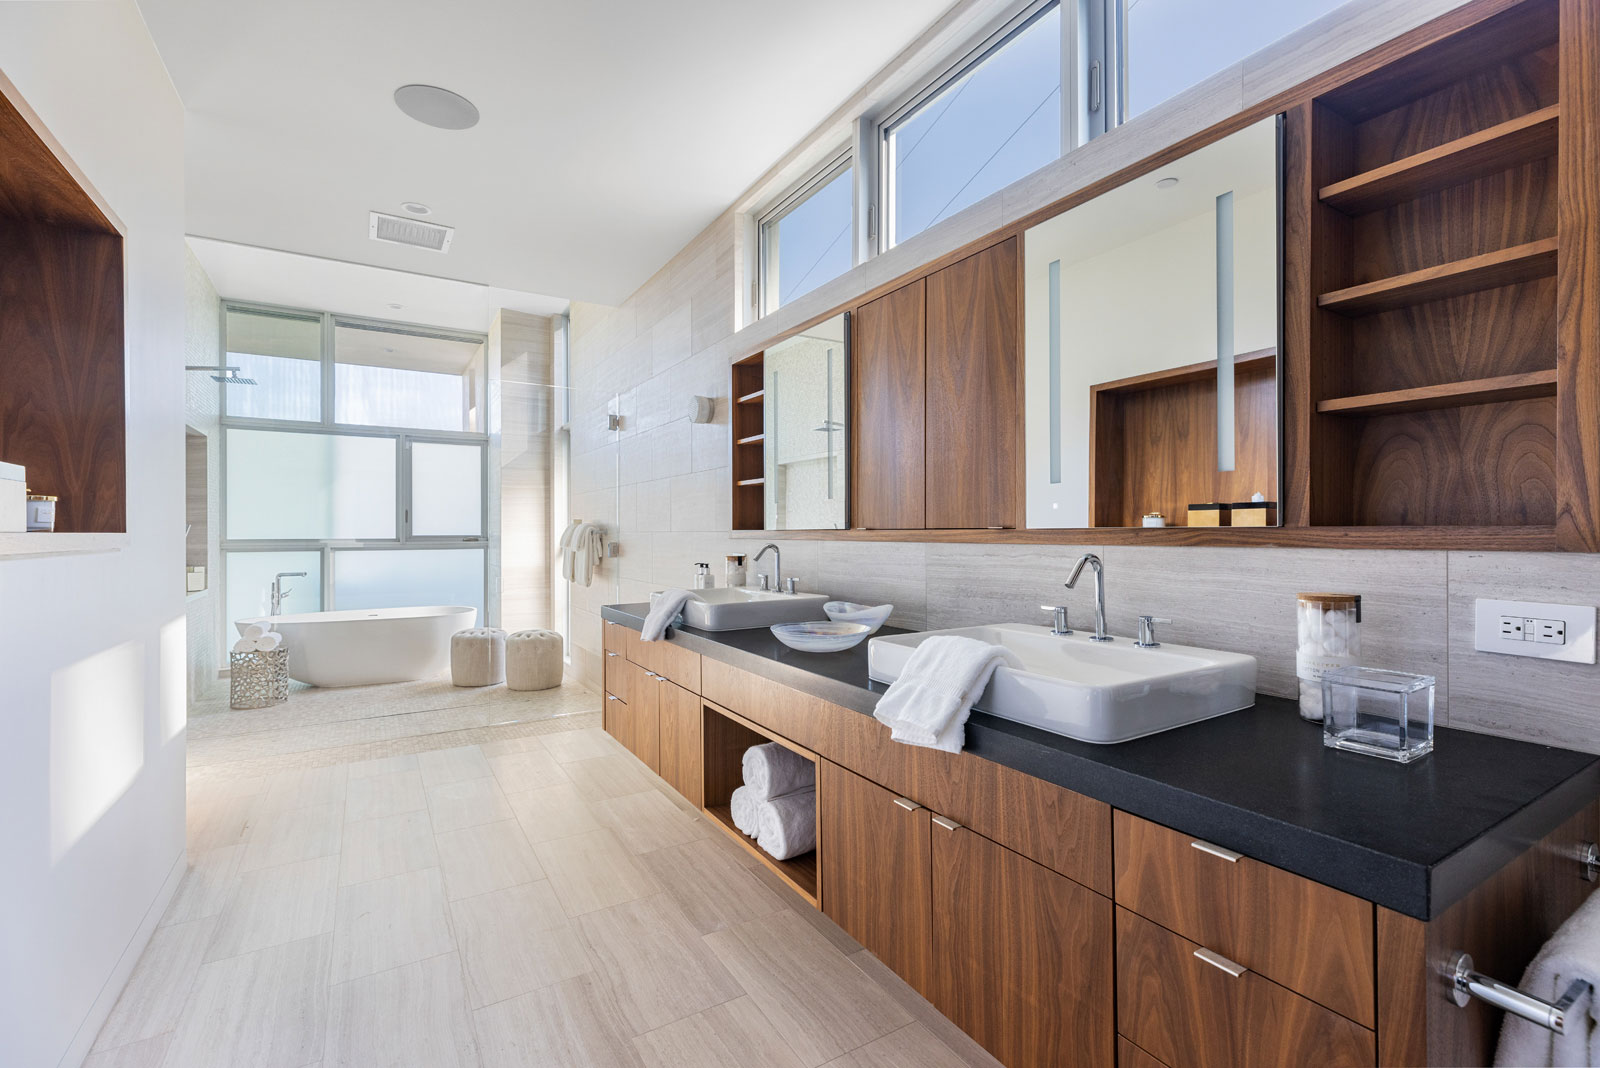 Walnut casework and Haisa light marble in the master bath. Photo: Photo: © Anthony Barcelo, Barcelo Photography